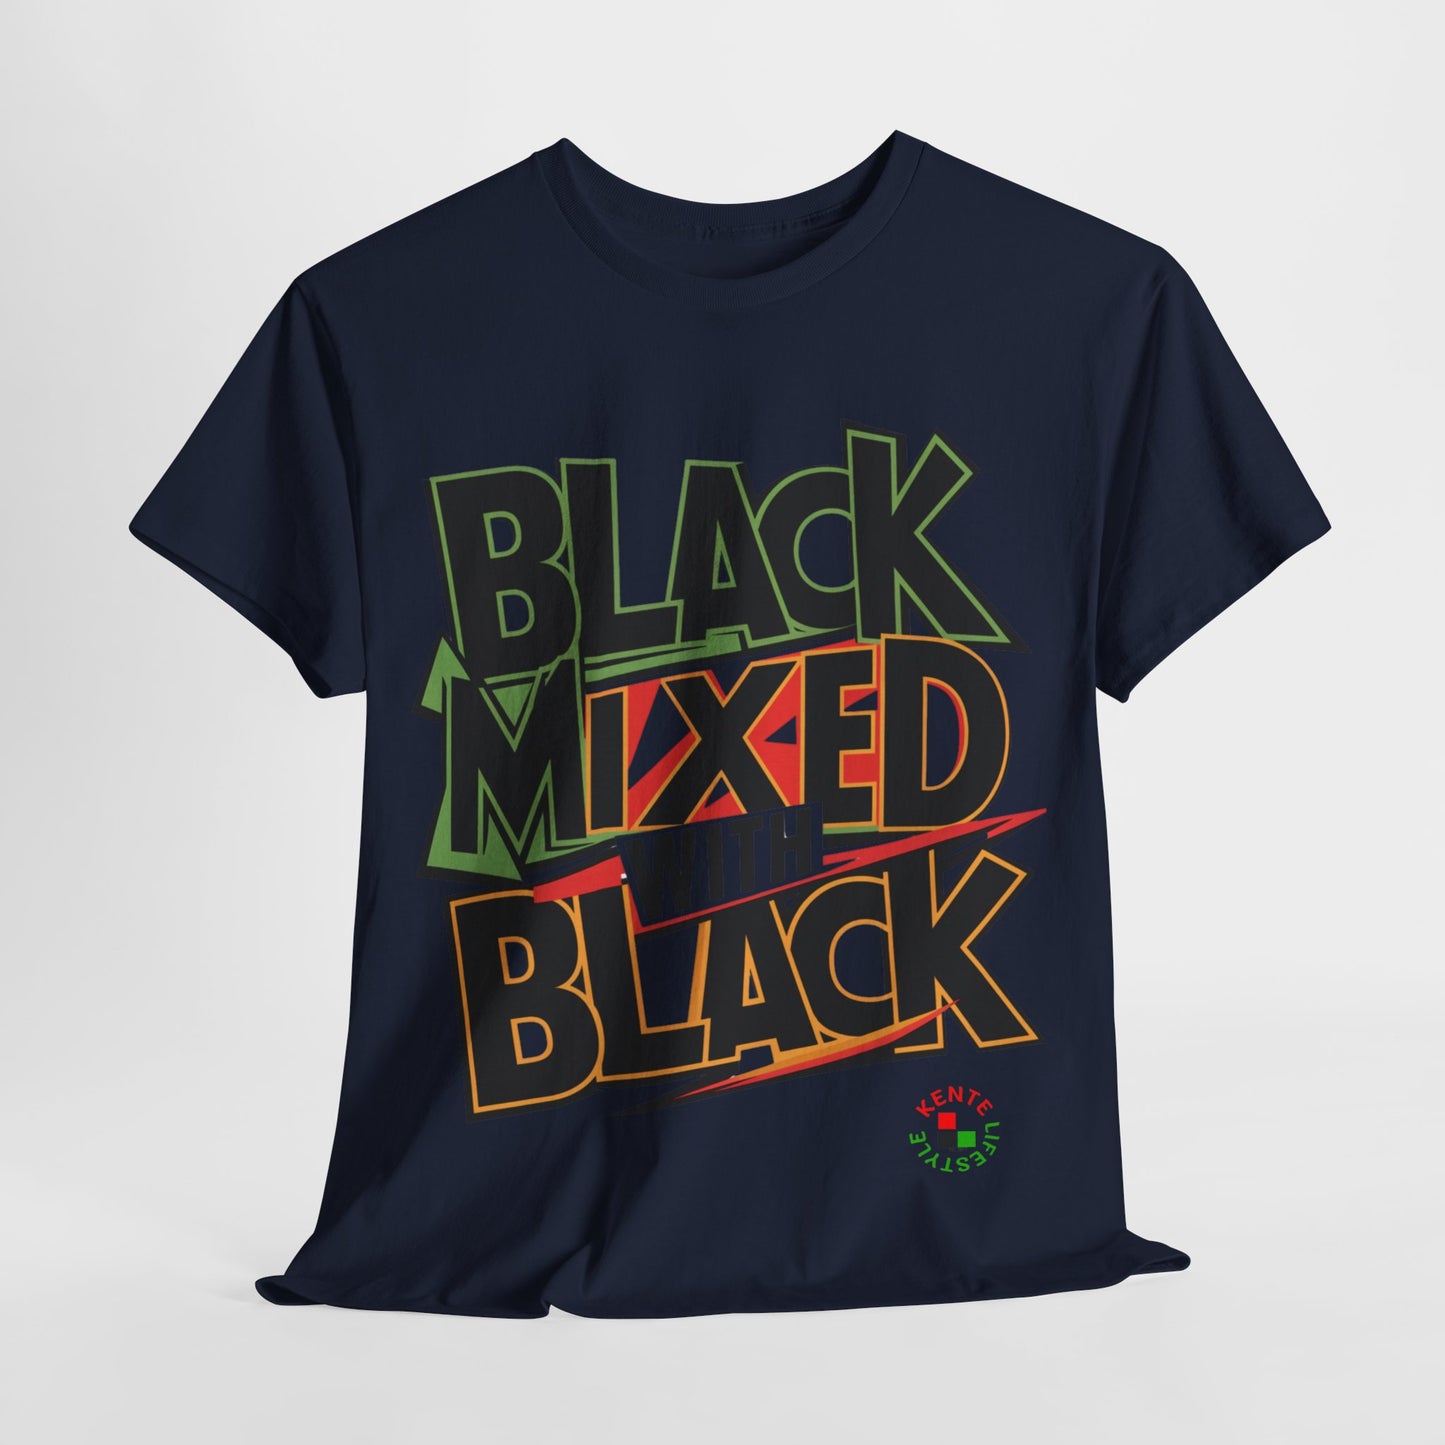 "Black Mixed with Black" -- T-shirt